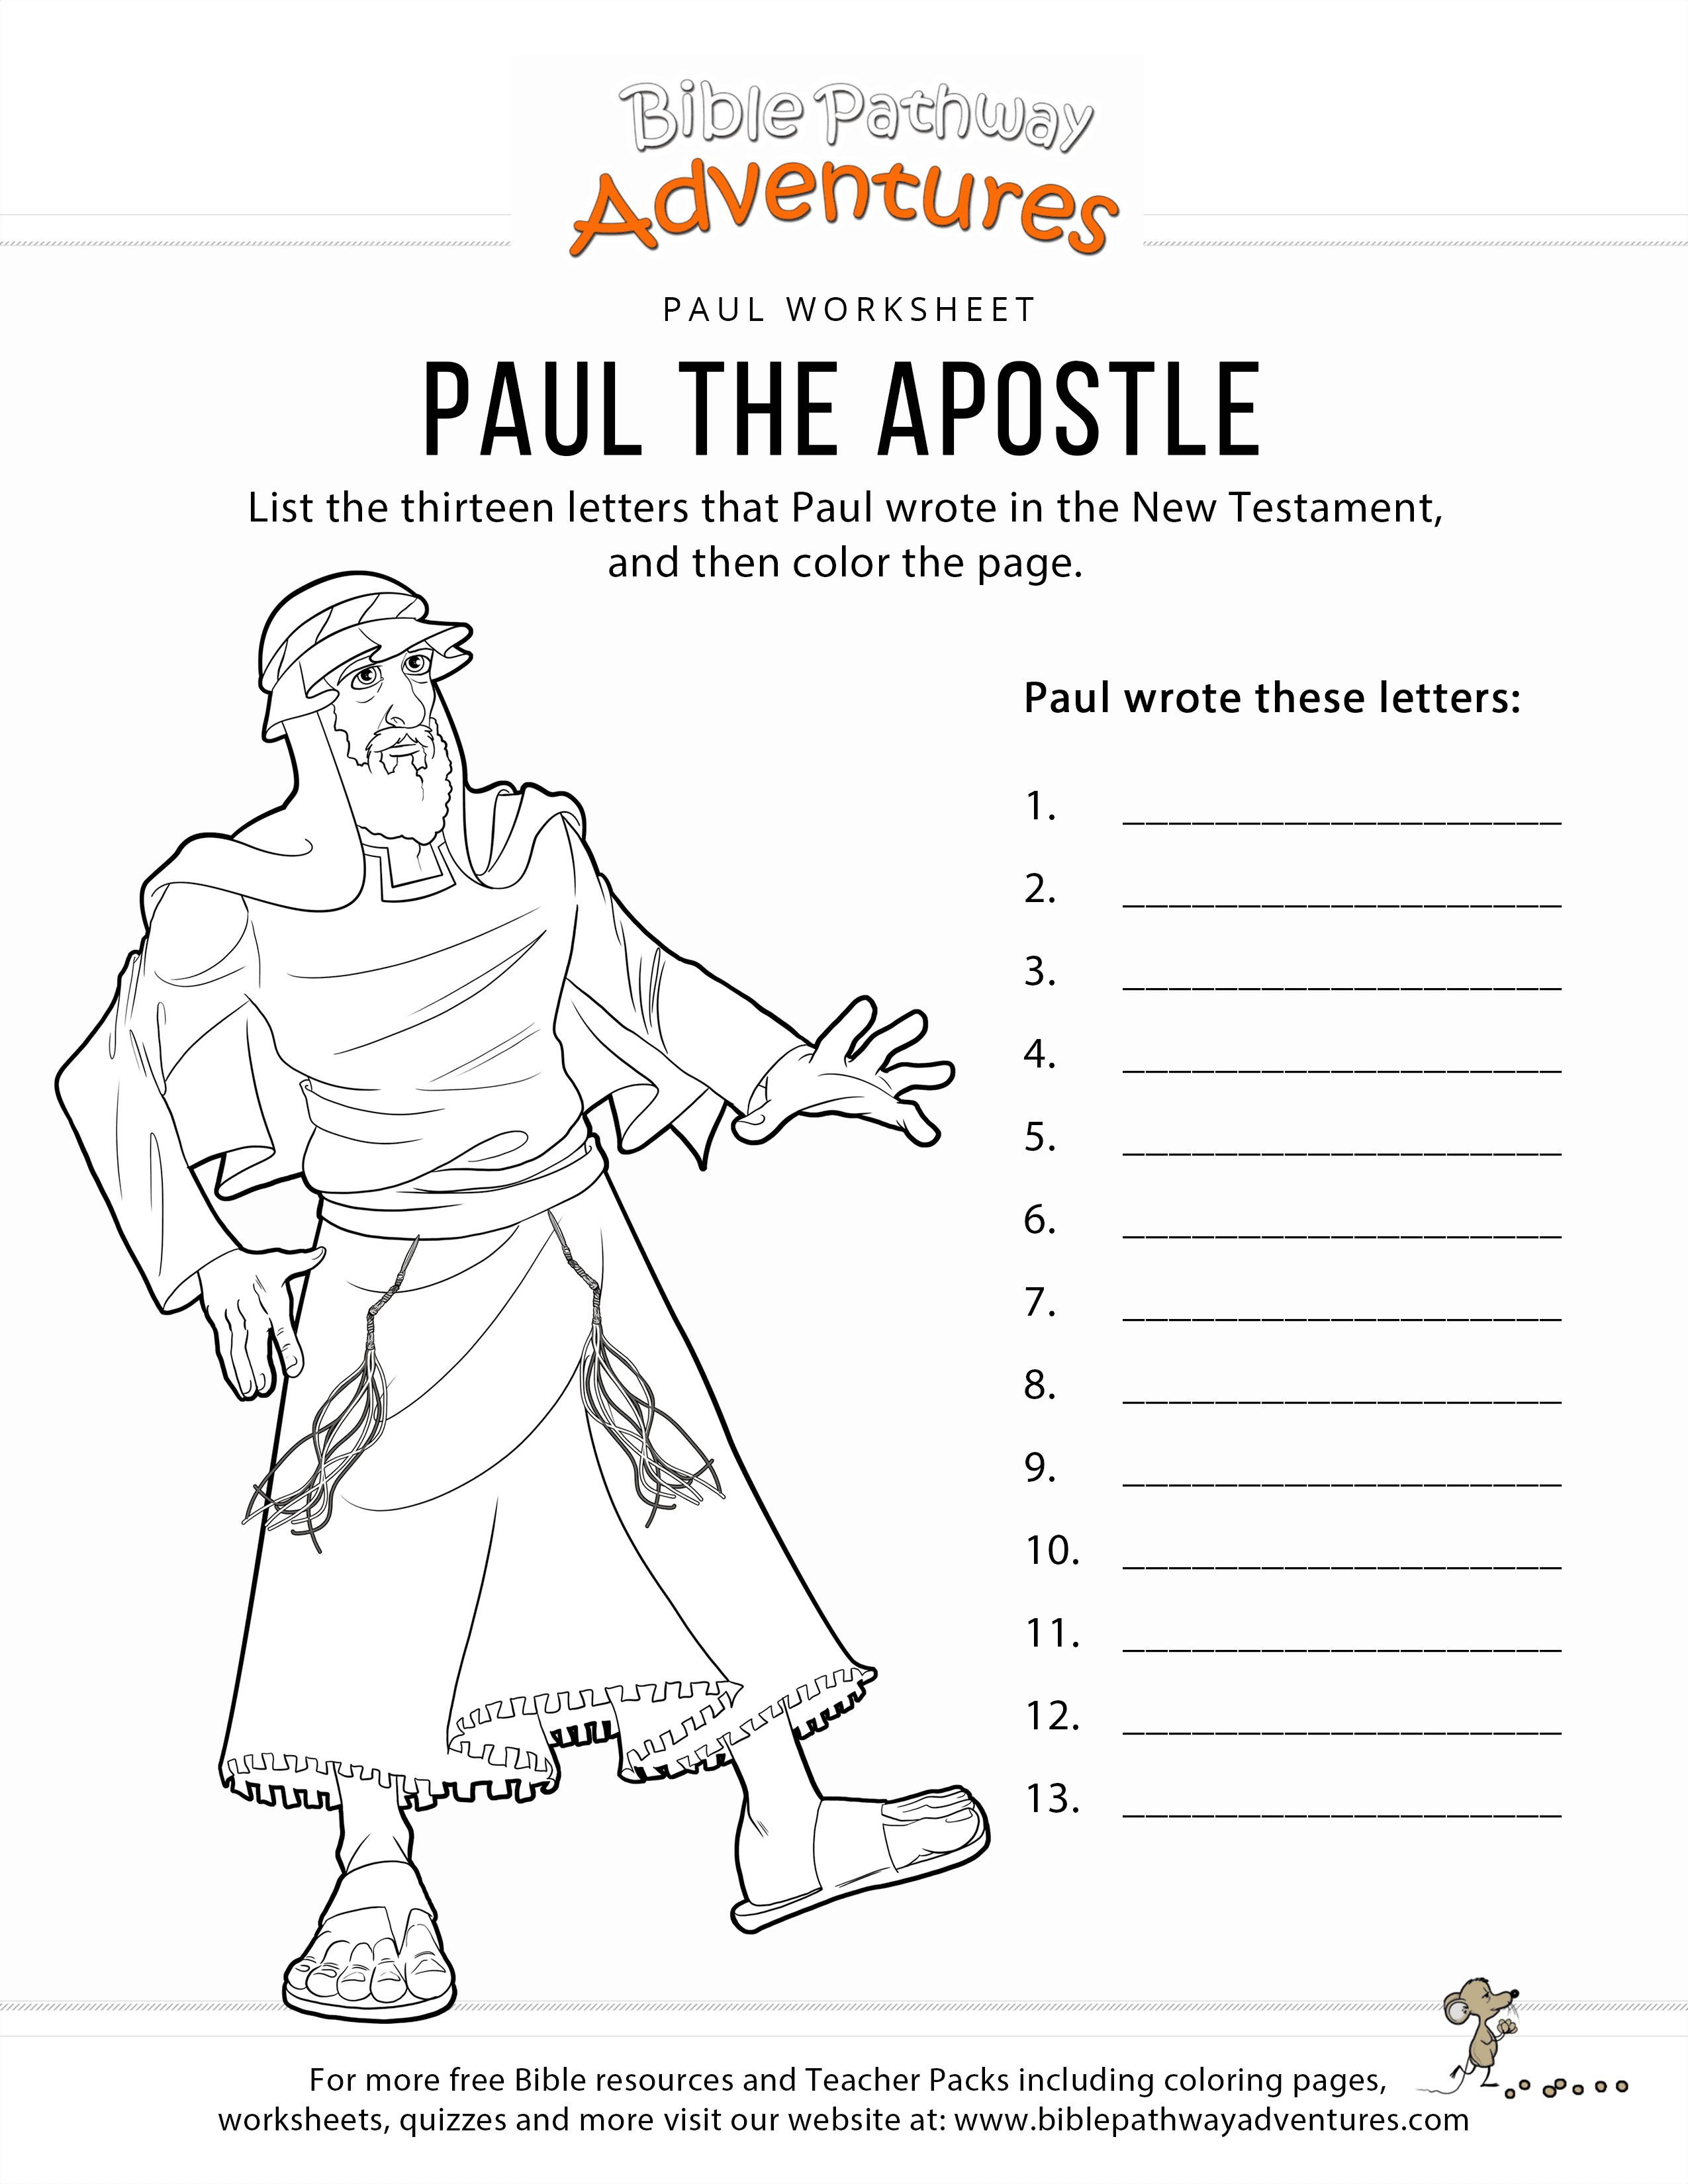 Paul Coloring Pages Paul The Apostle Worksheet Coloring Page Bible Pathway Adventures